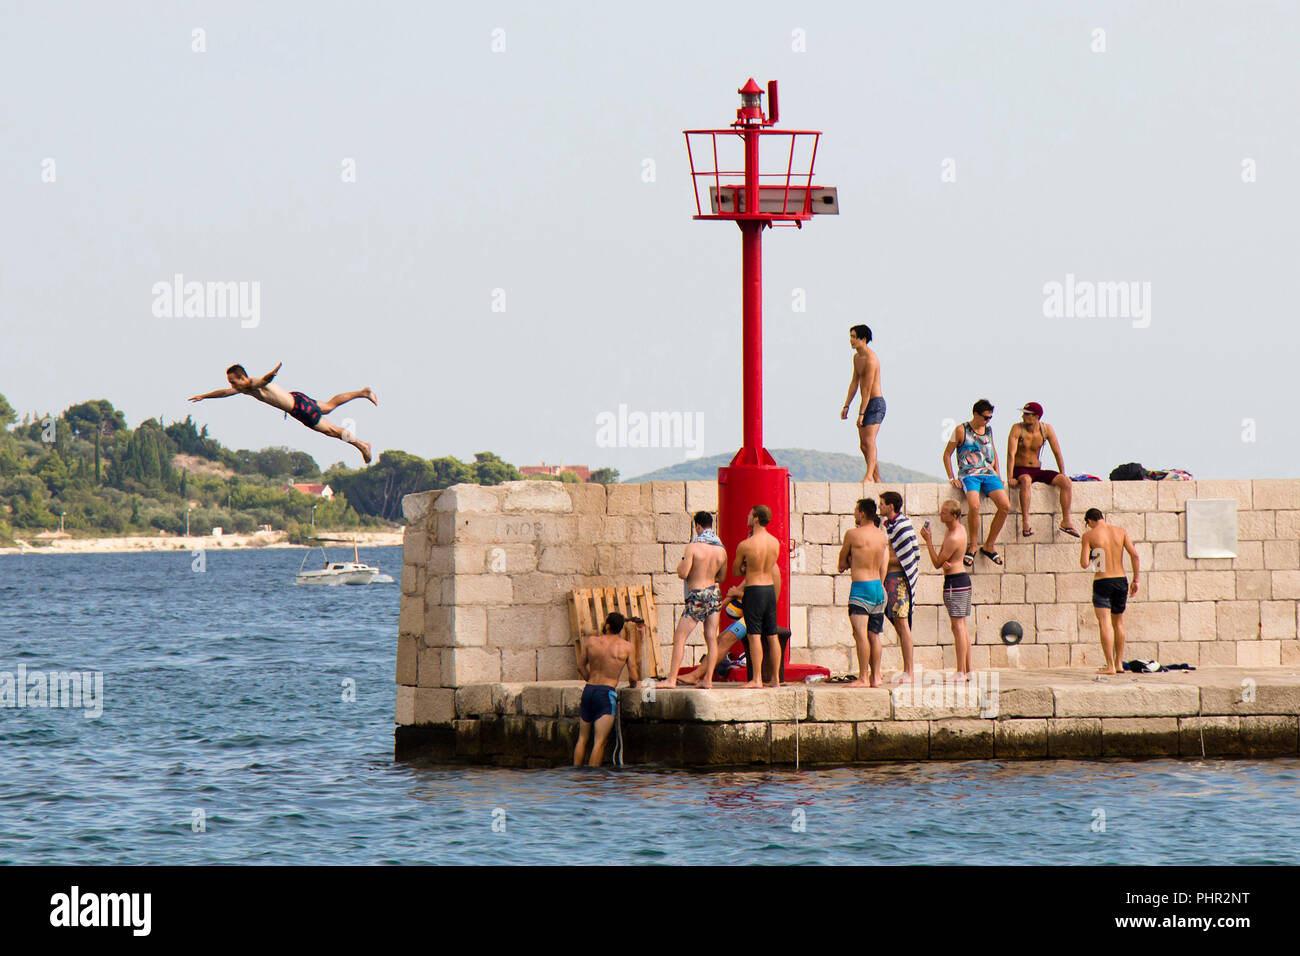 Vodice, Croatia - August 2, 2018: Young men in swimsuits standing on the pier and watching a man jumping in the sea in summer season Stock Photo